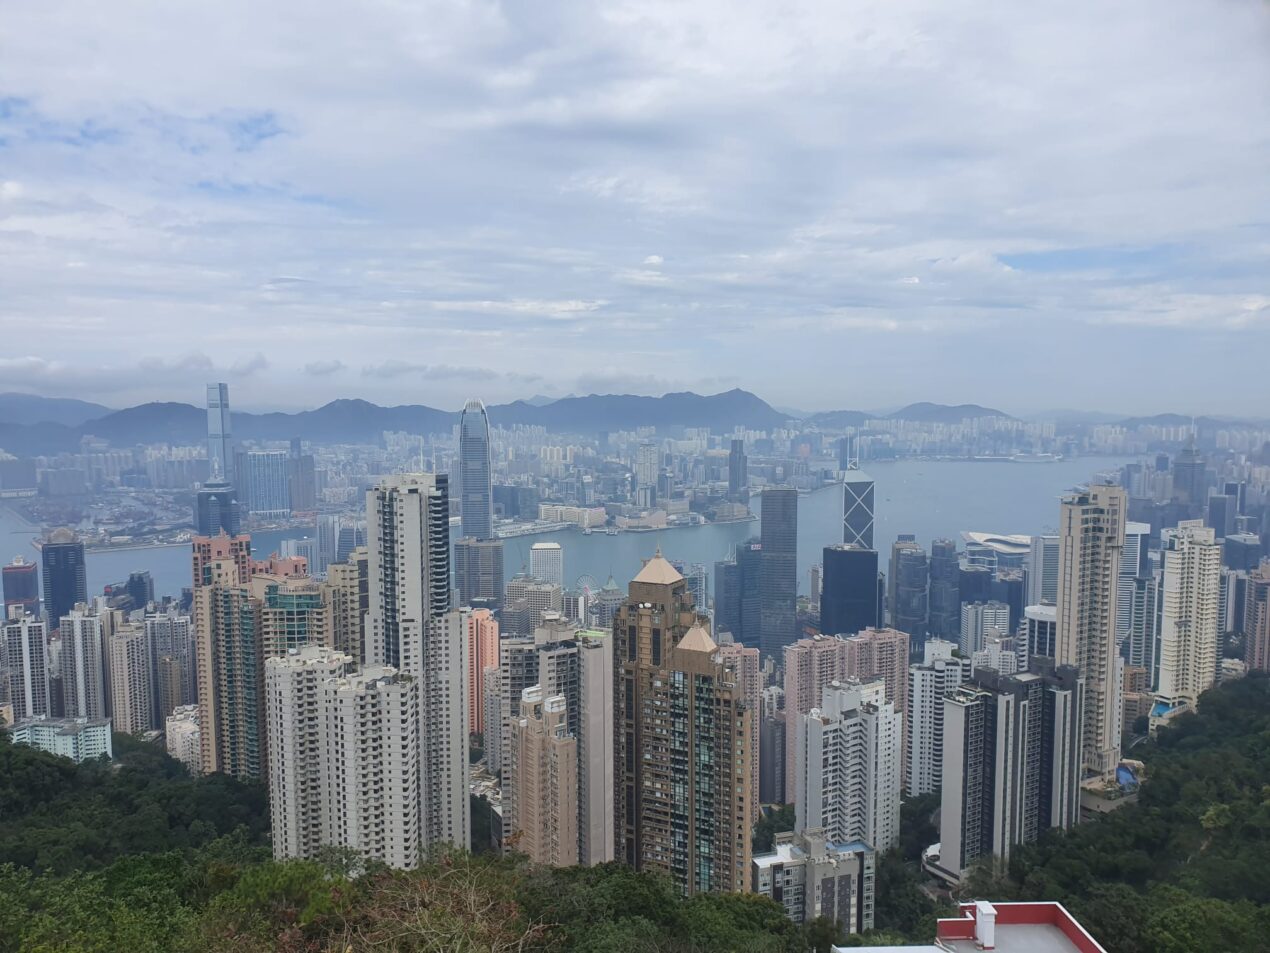 Hong Kong skyline during the day from The Peak